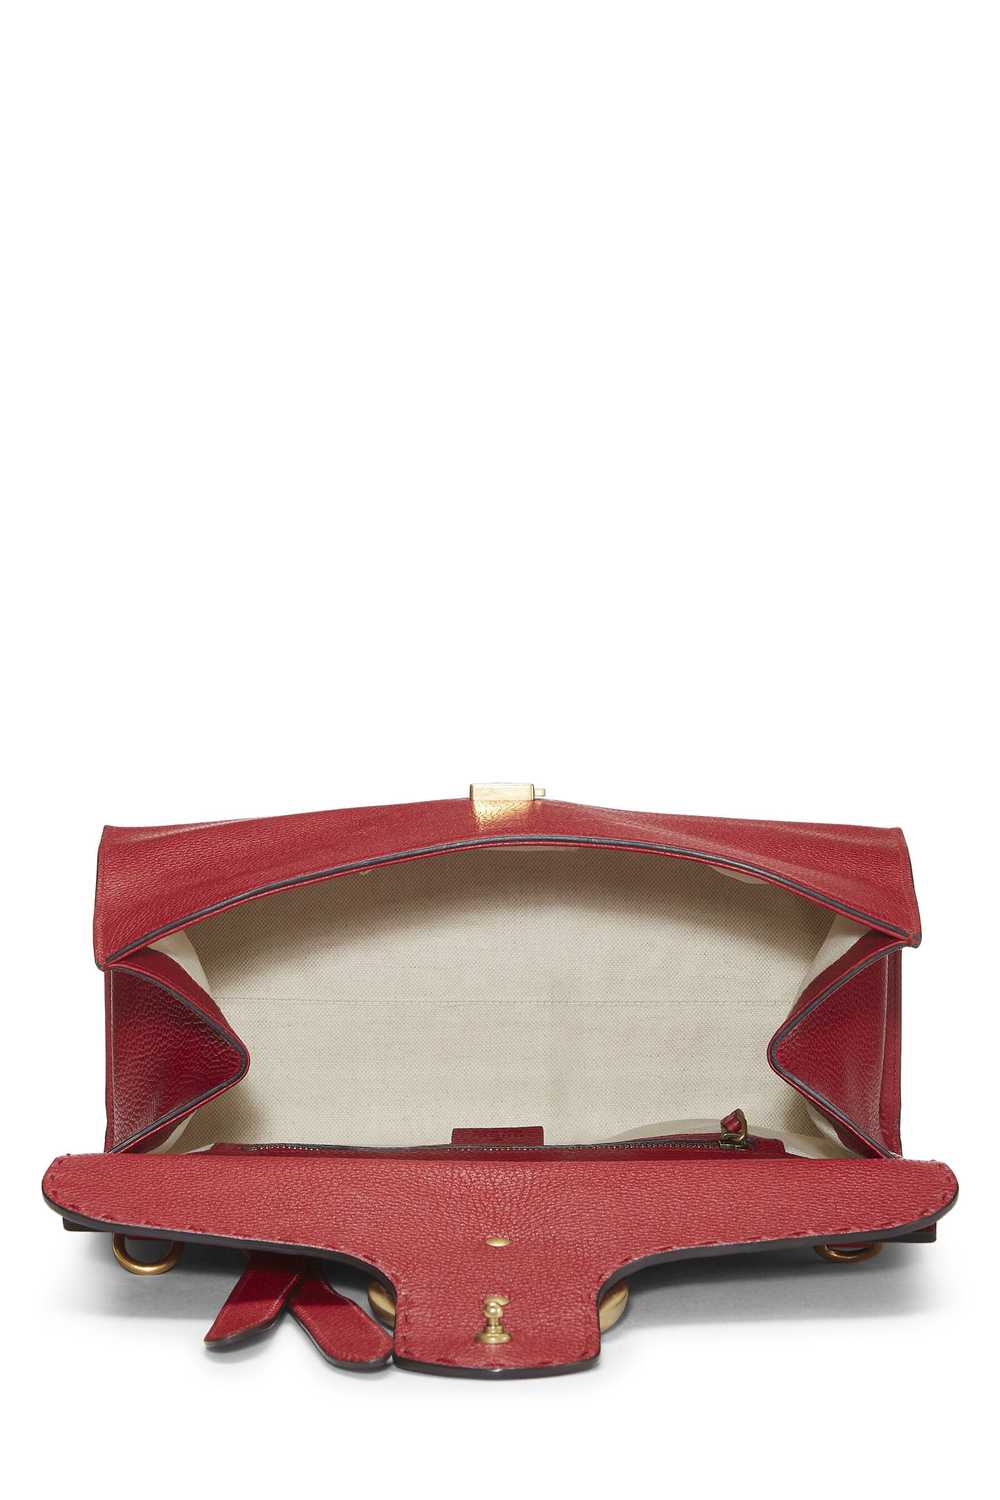 Red Leather GG Marmont Top Handle Flap Bag Small - image 6